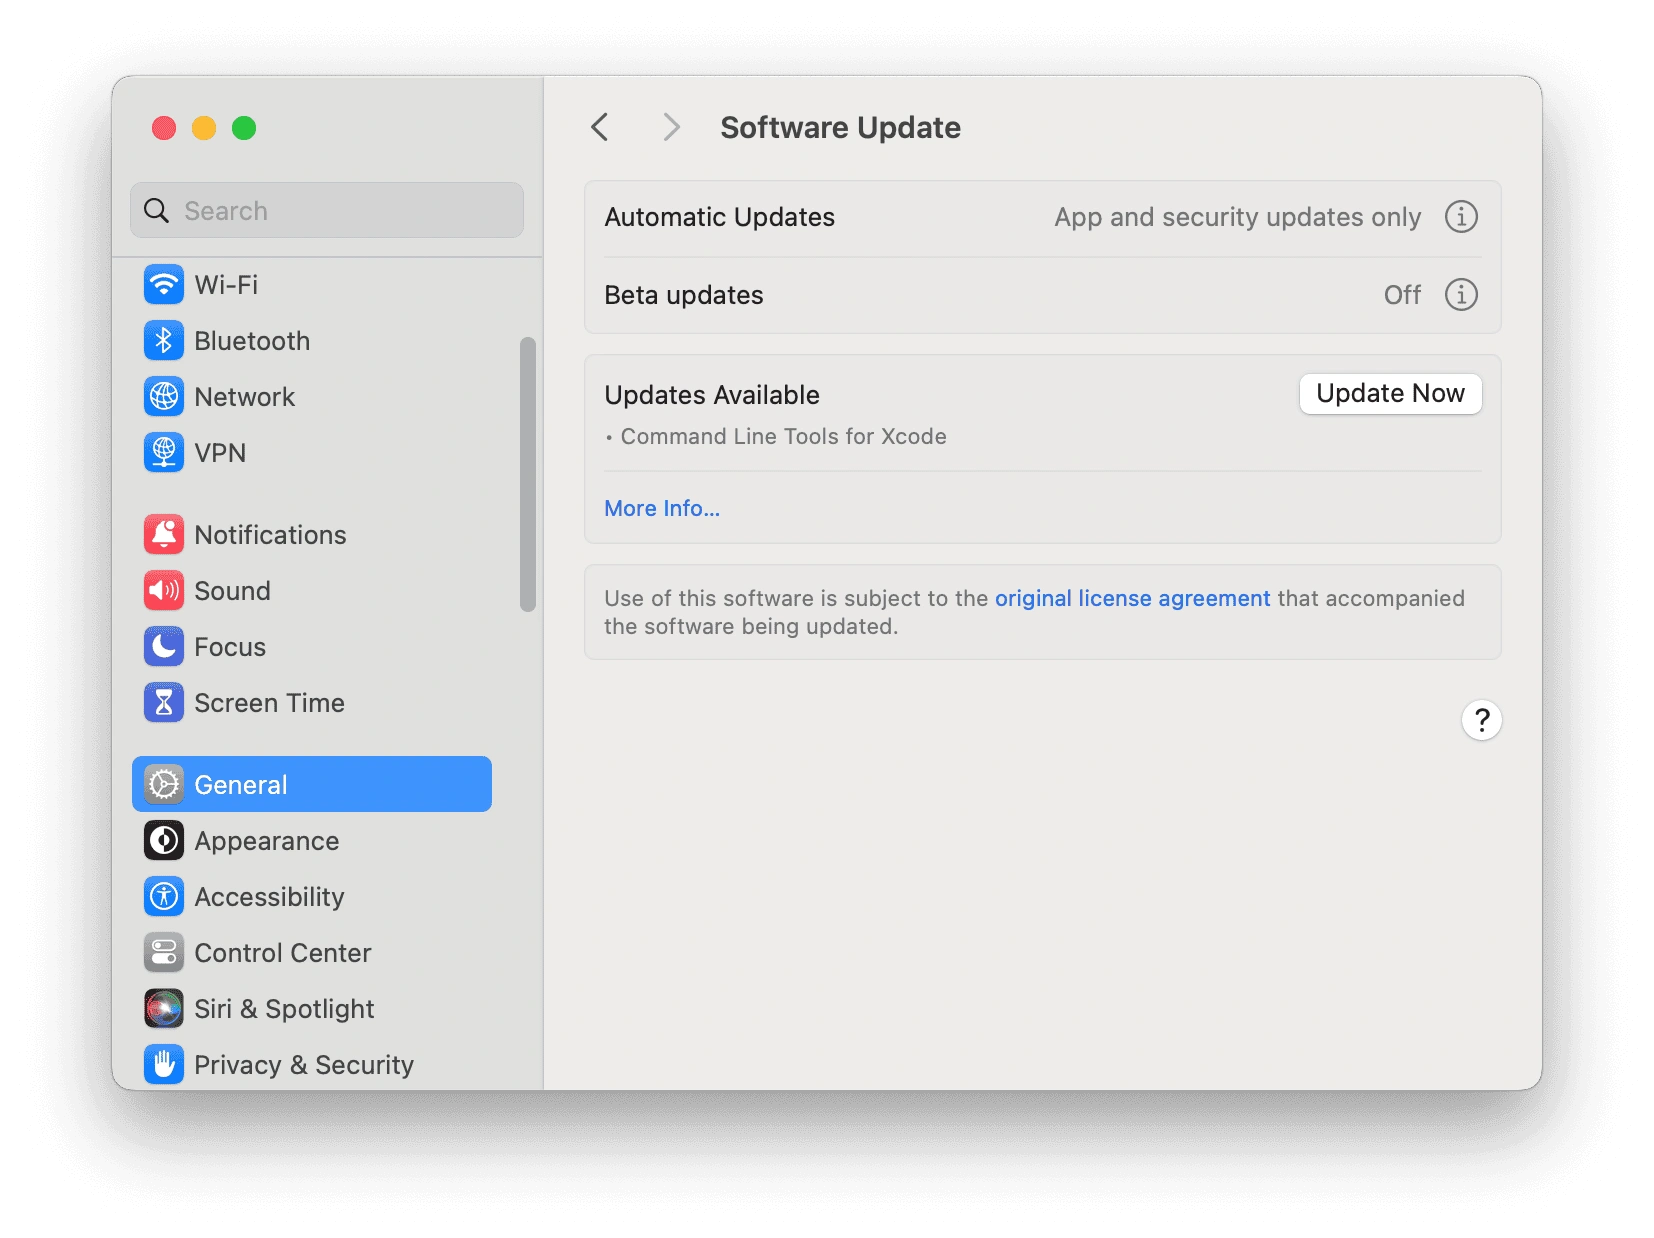 Check Software Upate on Mac